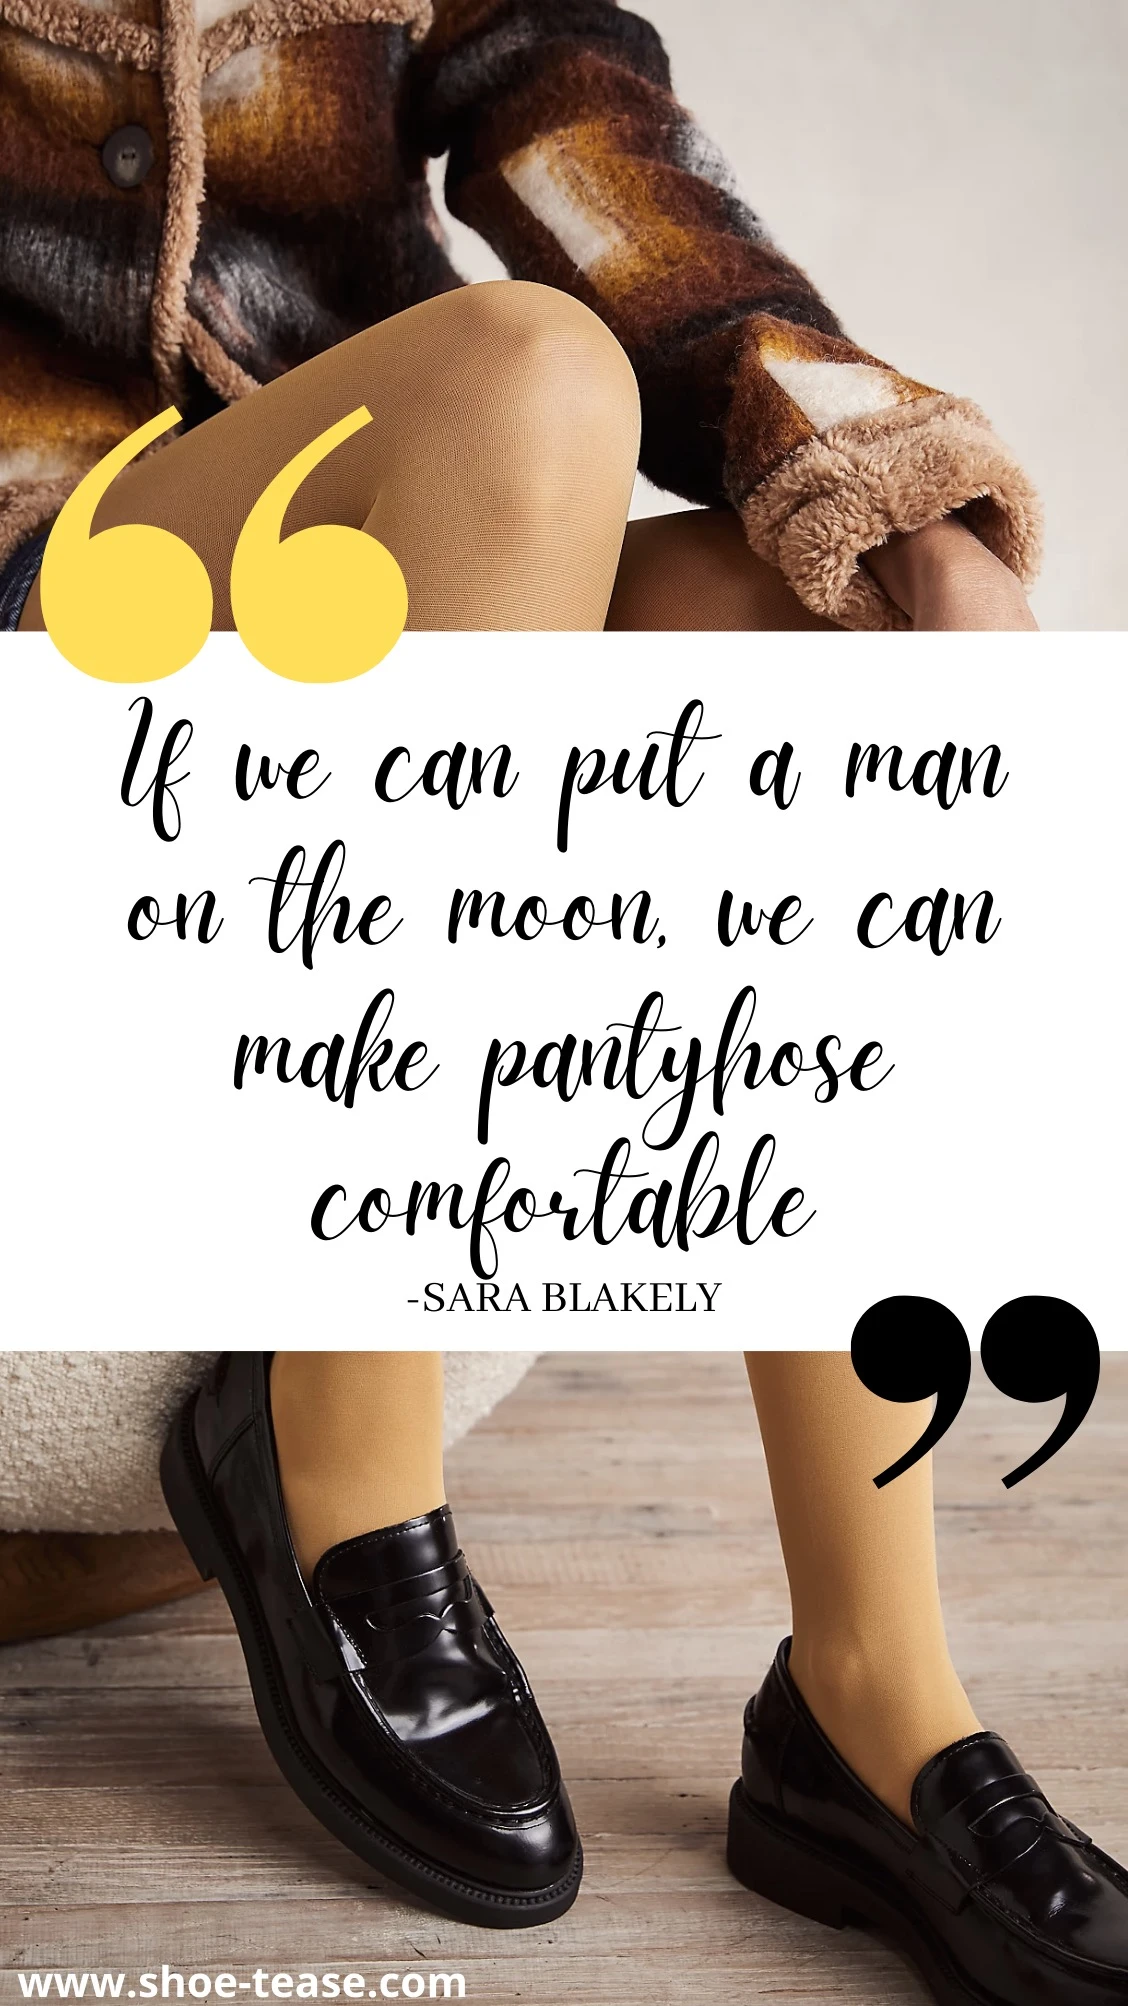 Text reading If we can put a man on the moon, we can make pantyhose comfortable by Sara Blakely over woman's legs wearing yellow tights and black loafers.